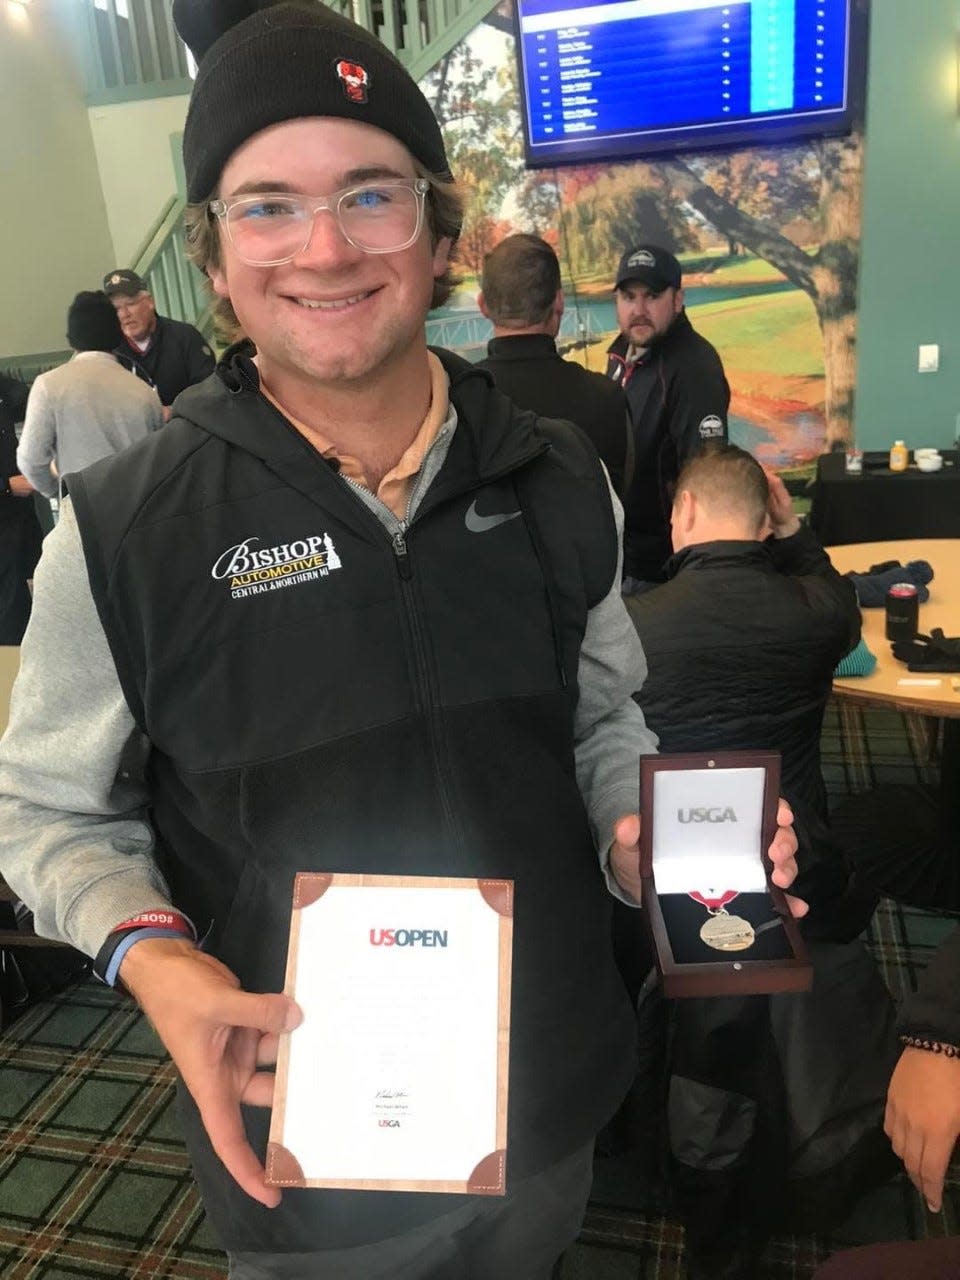 Cheboygan's PJ Maybank III took first place at a United States Open local qualifier golf event at Muskegon Country Club on Monday. Maybank now advances to the sectional qualifier, which will be held in Ohio on June 5.